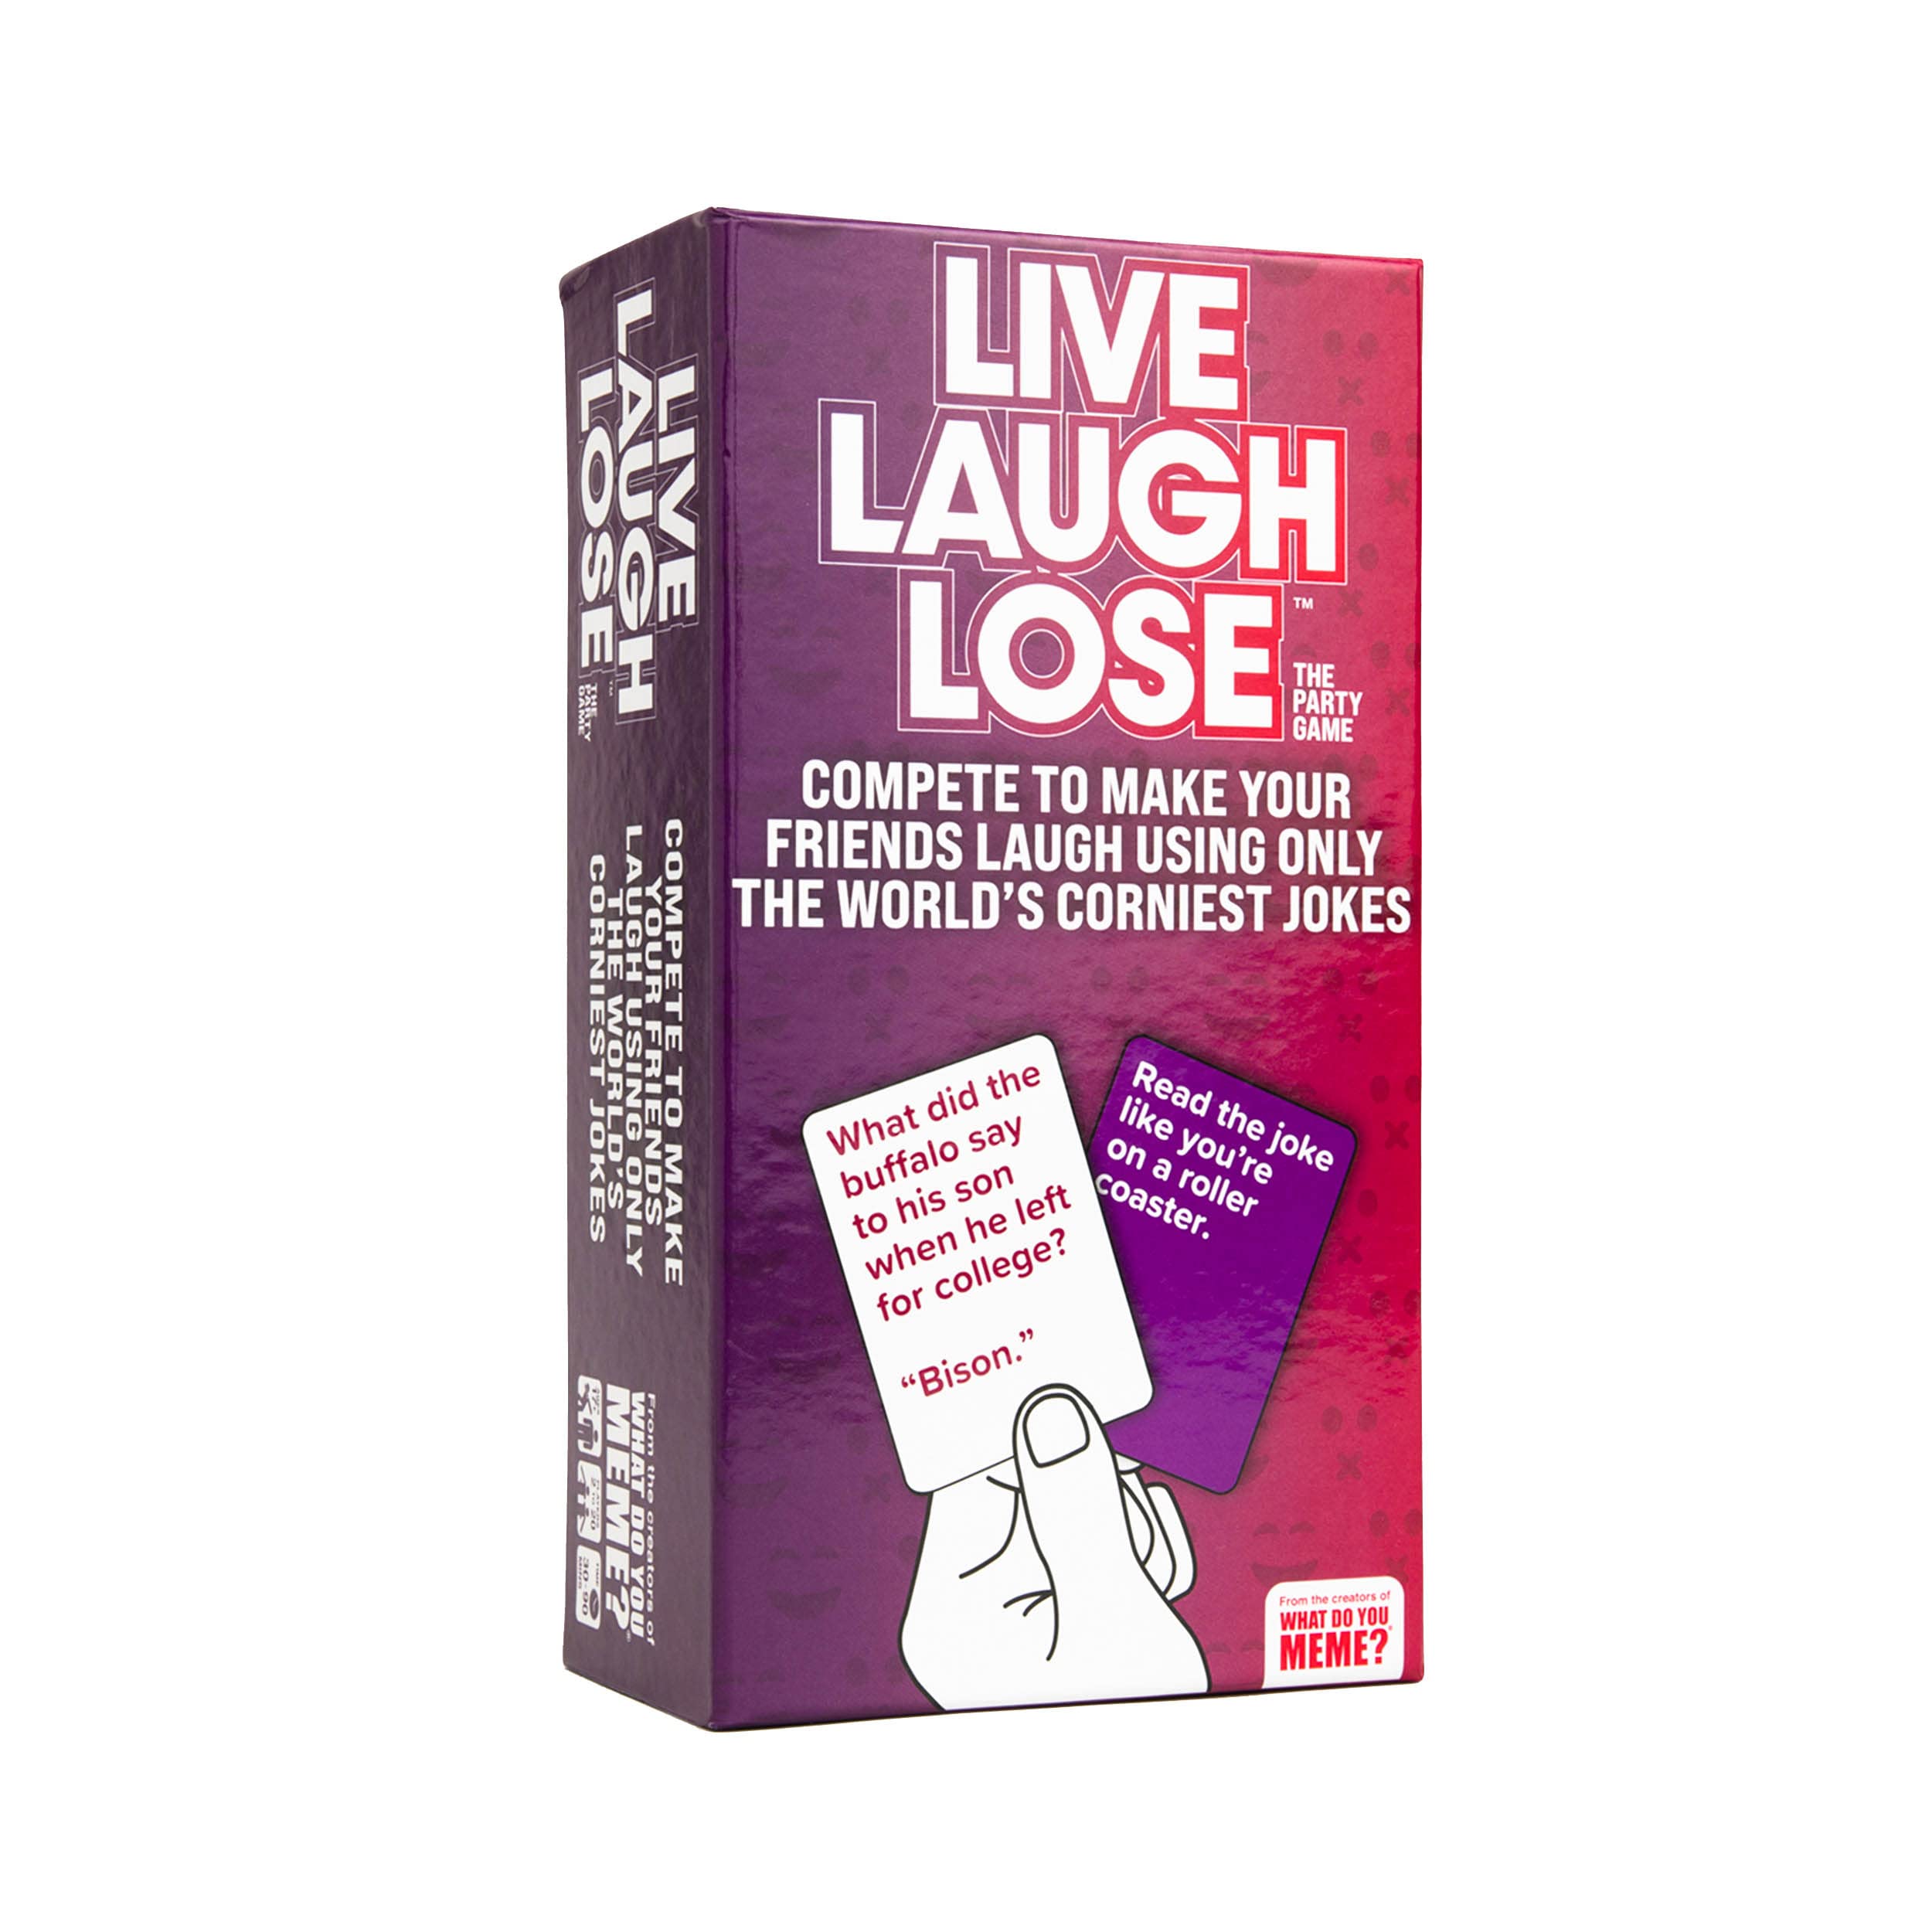 WHAT DO YOU MEME? Live Laugh Lose - The Party Game Where You Compete to Make Corny Jokes Funny